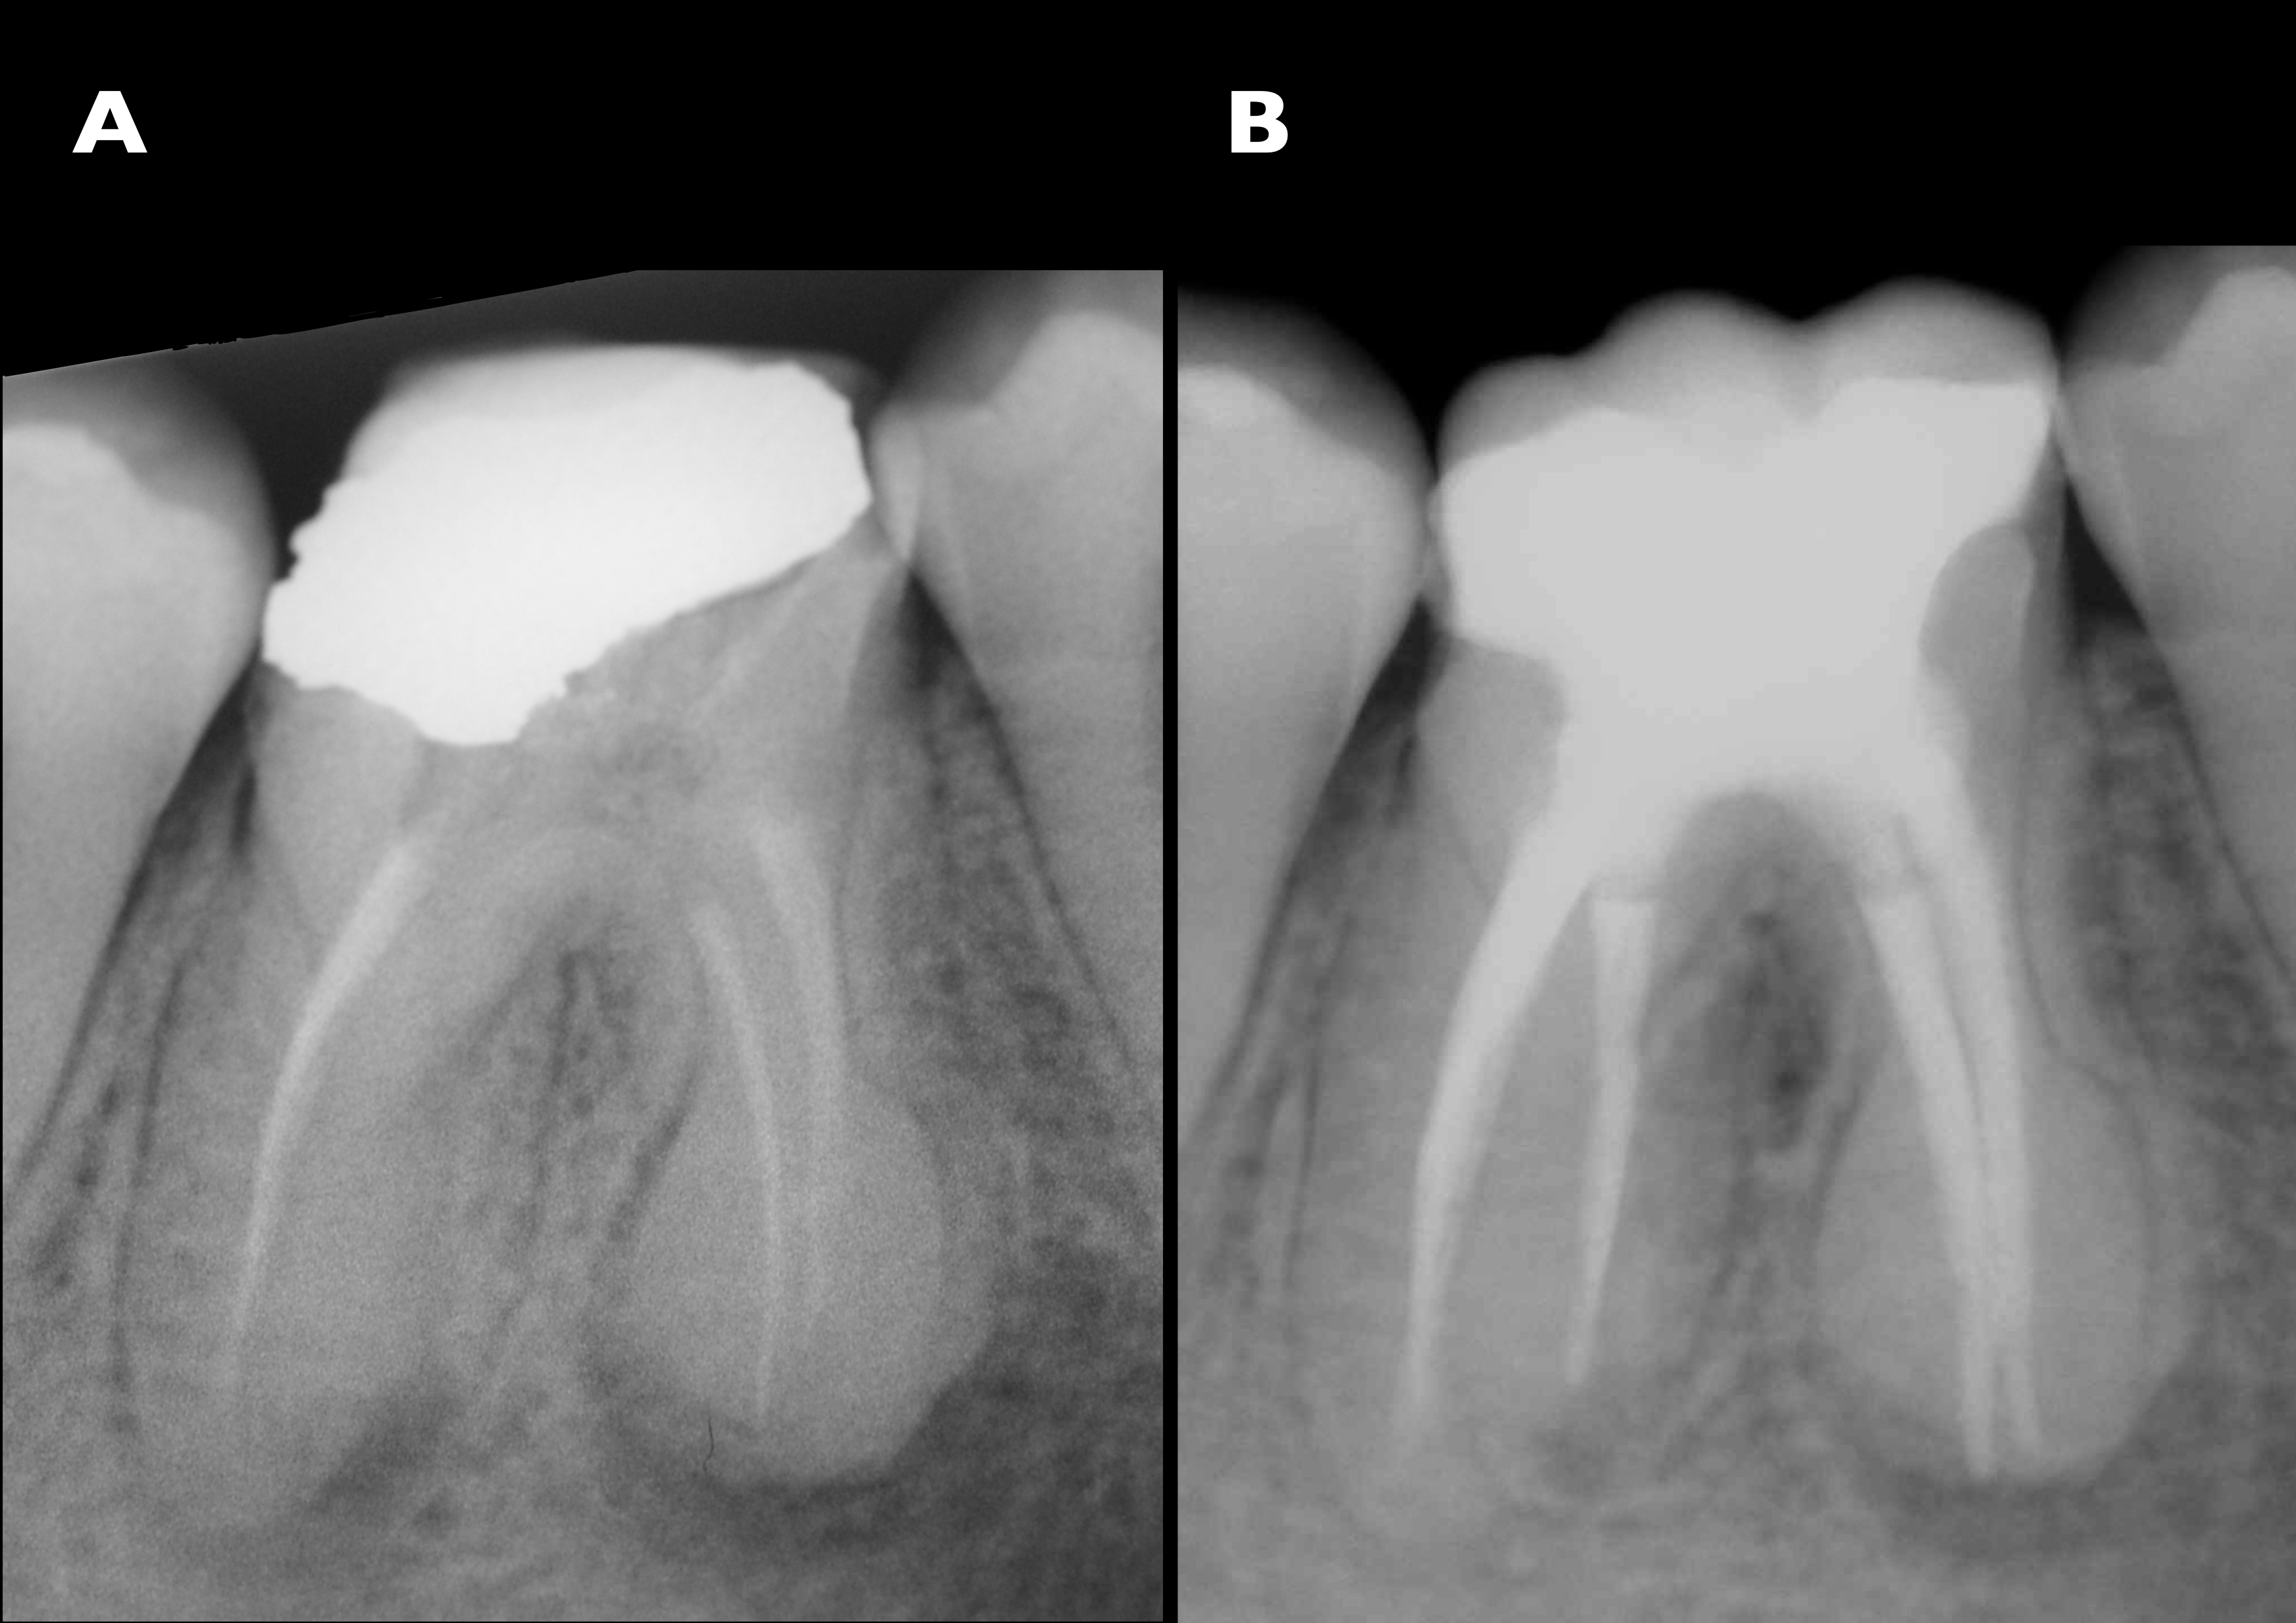 Figs. 23a & b: Radiographs before (a) and after (b) treatment, showing dramatic differences. The endodontic treatment had been corrected and the restoration was well adapted and shaped. The interproximal relationships had been re-established through the anatomy of the endocrown. There were no gaps between the restoration and the endodontic filling. The sealing of the endodontic treatment was complete and tight.